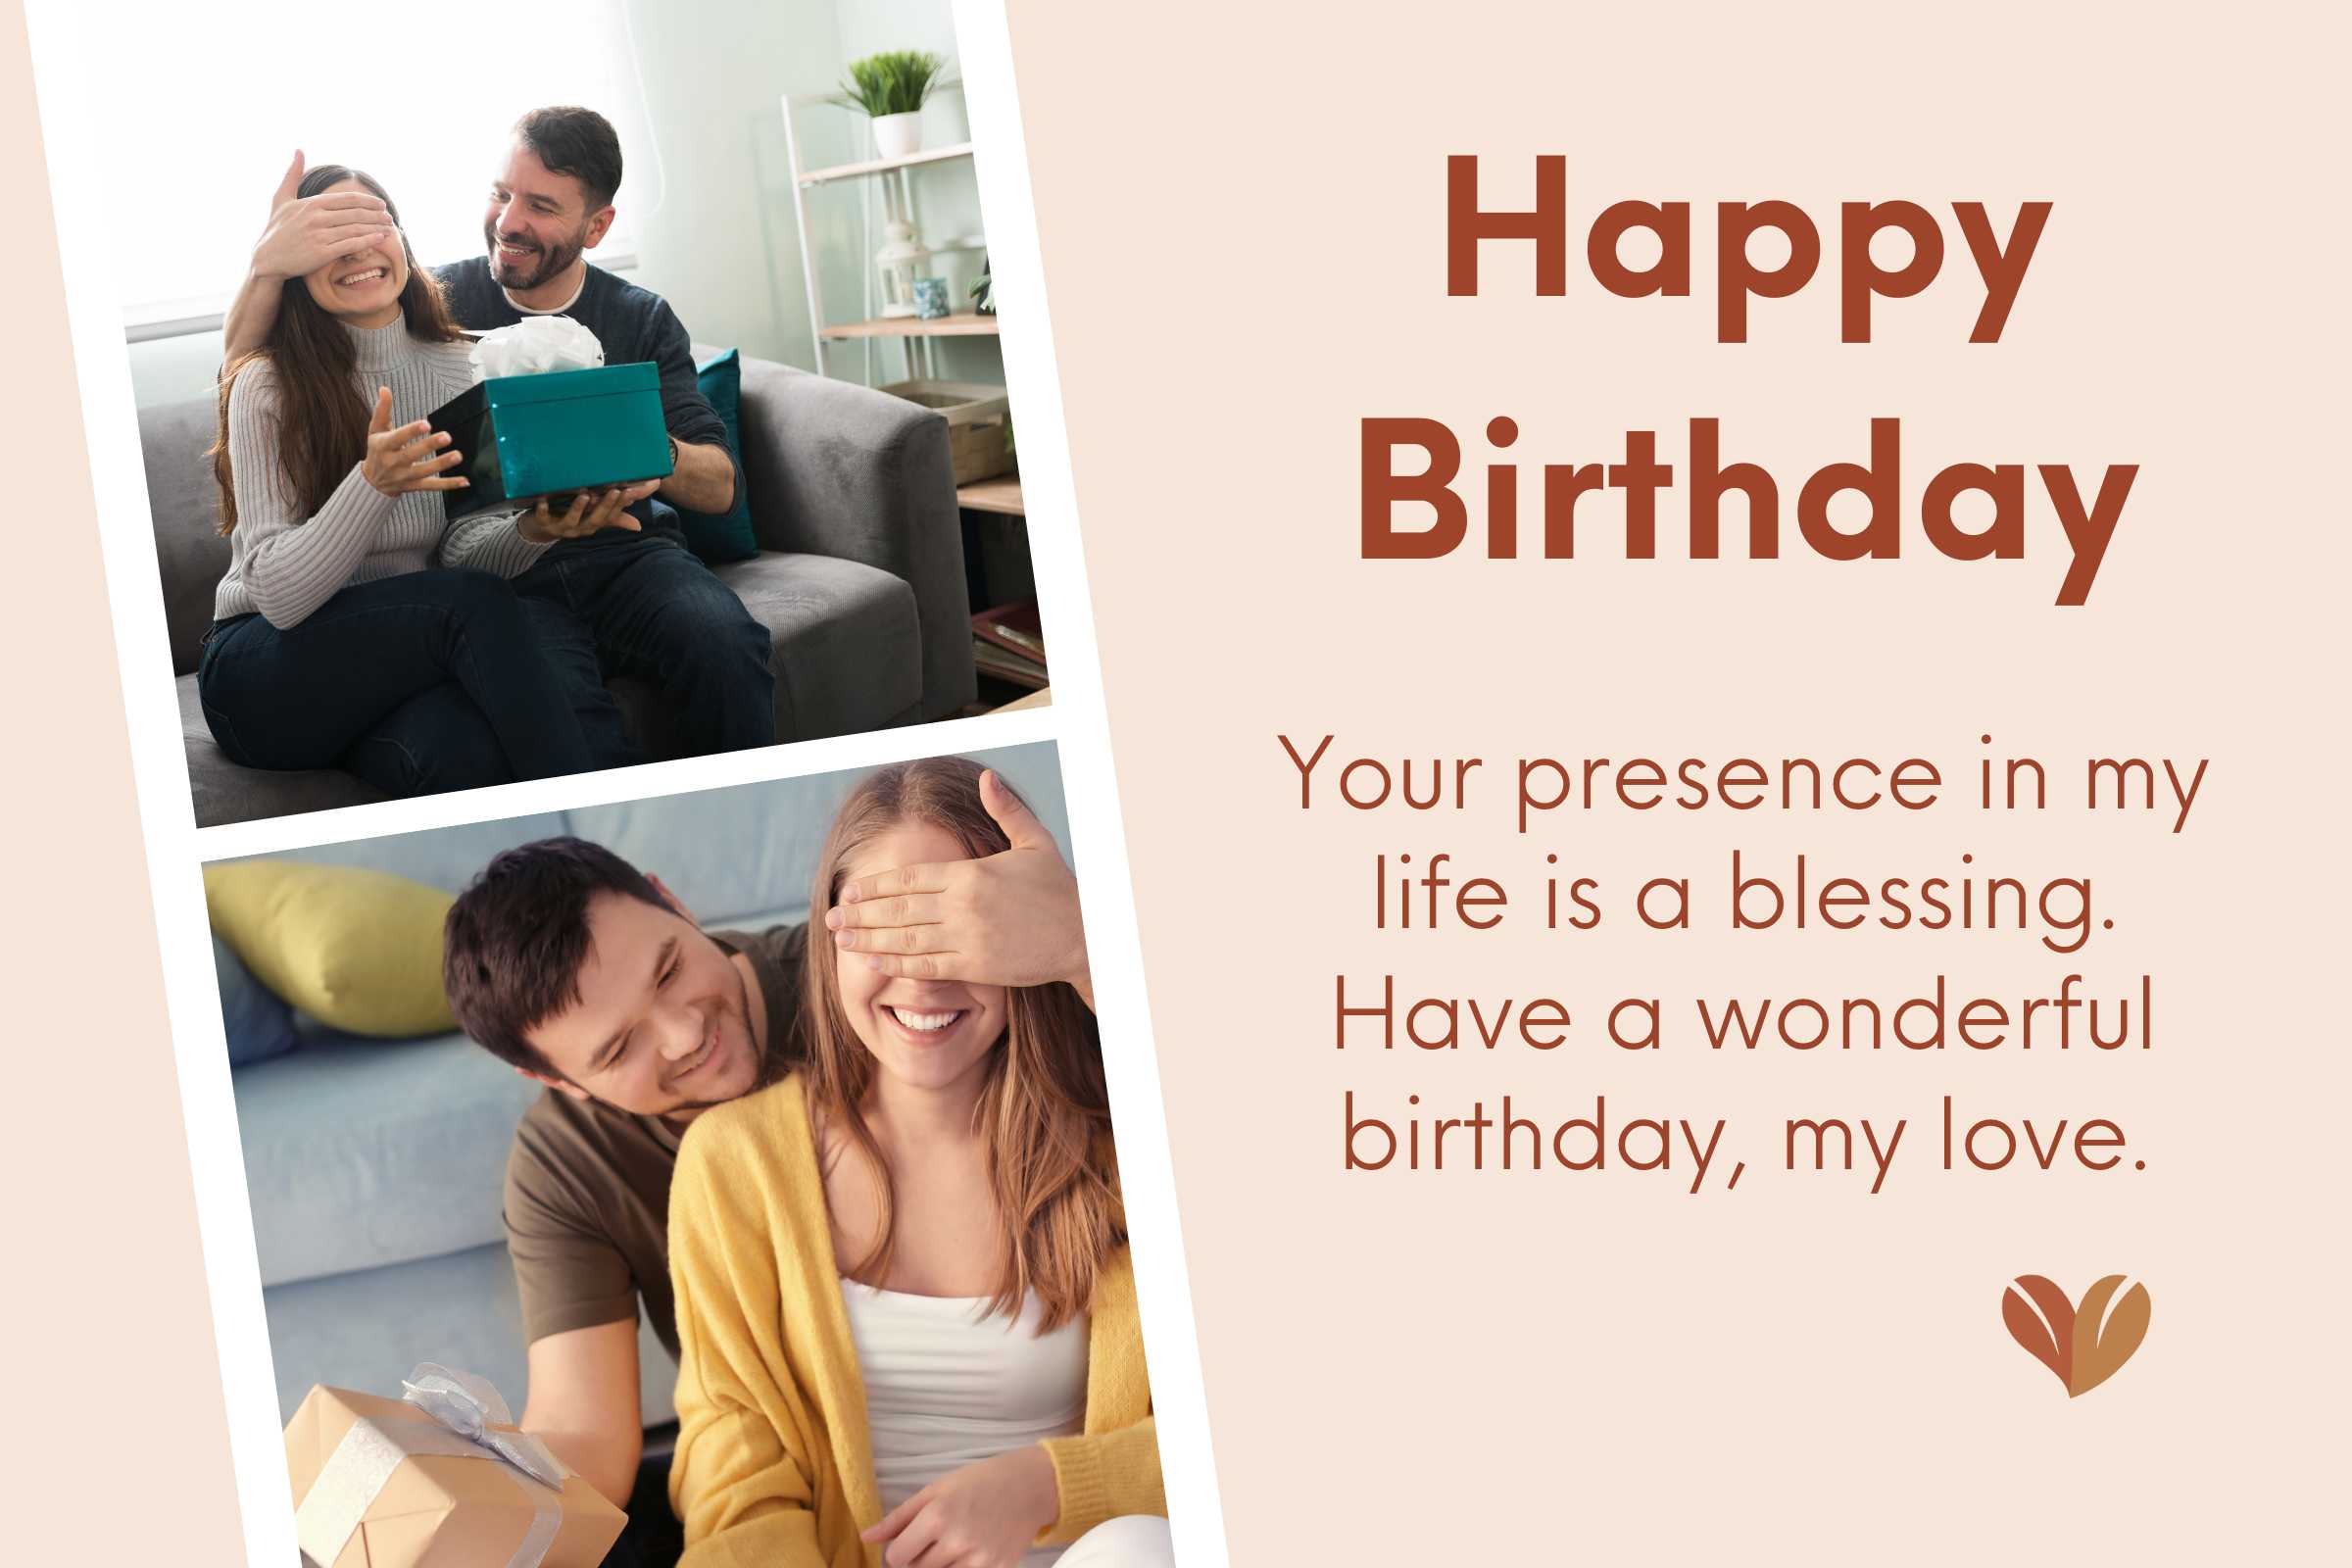 Your presence is a treasure I cherish every day - Happy birthday wishes for fiance